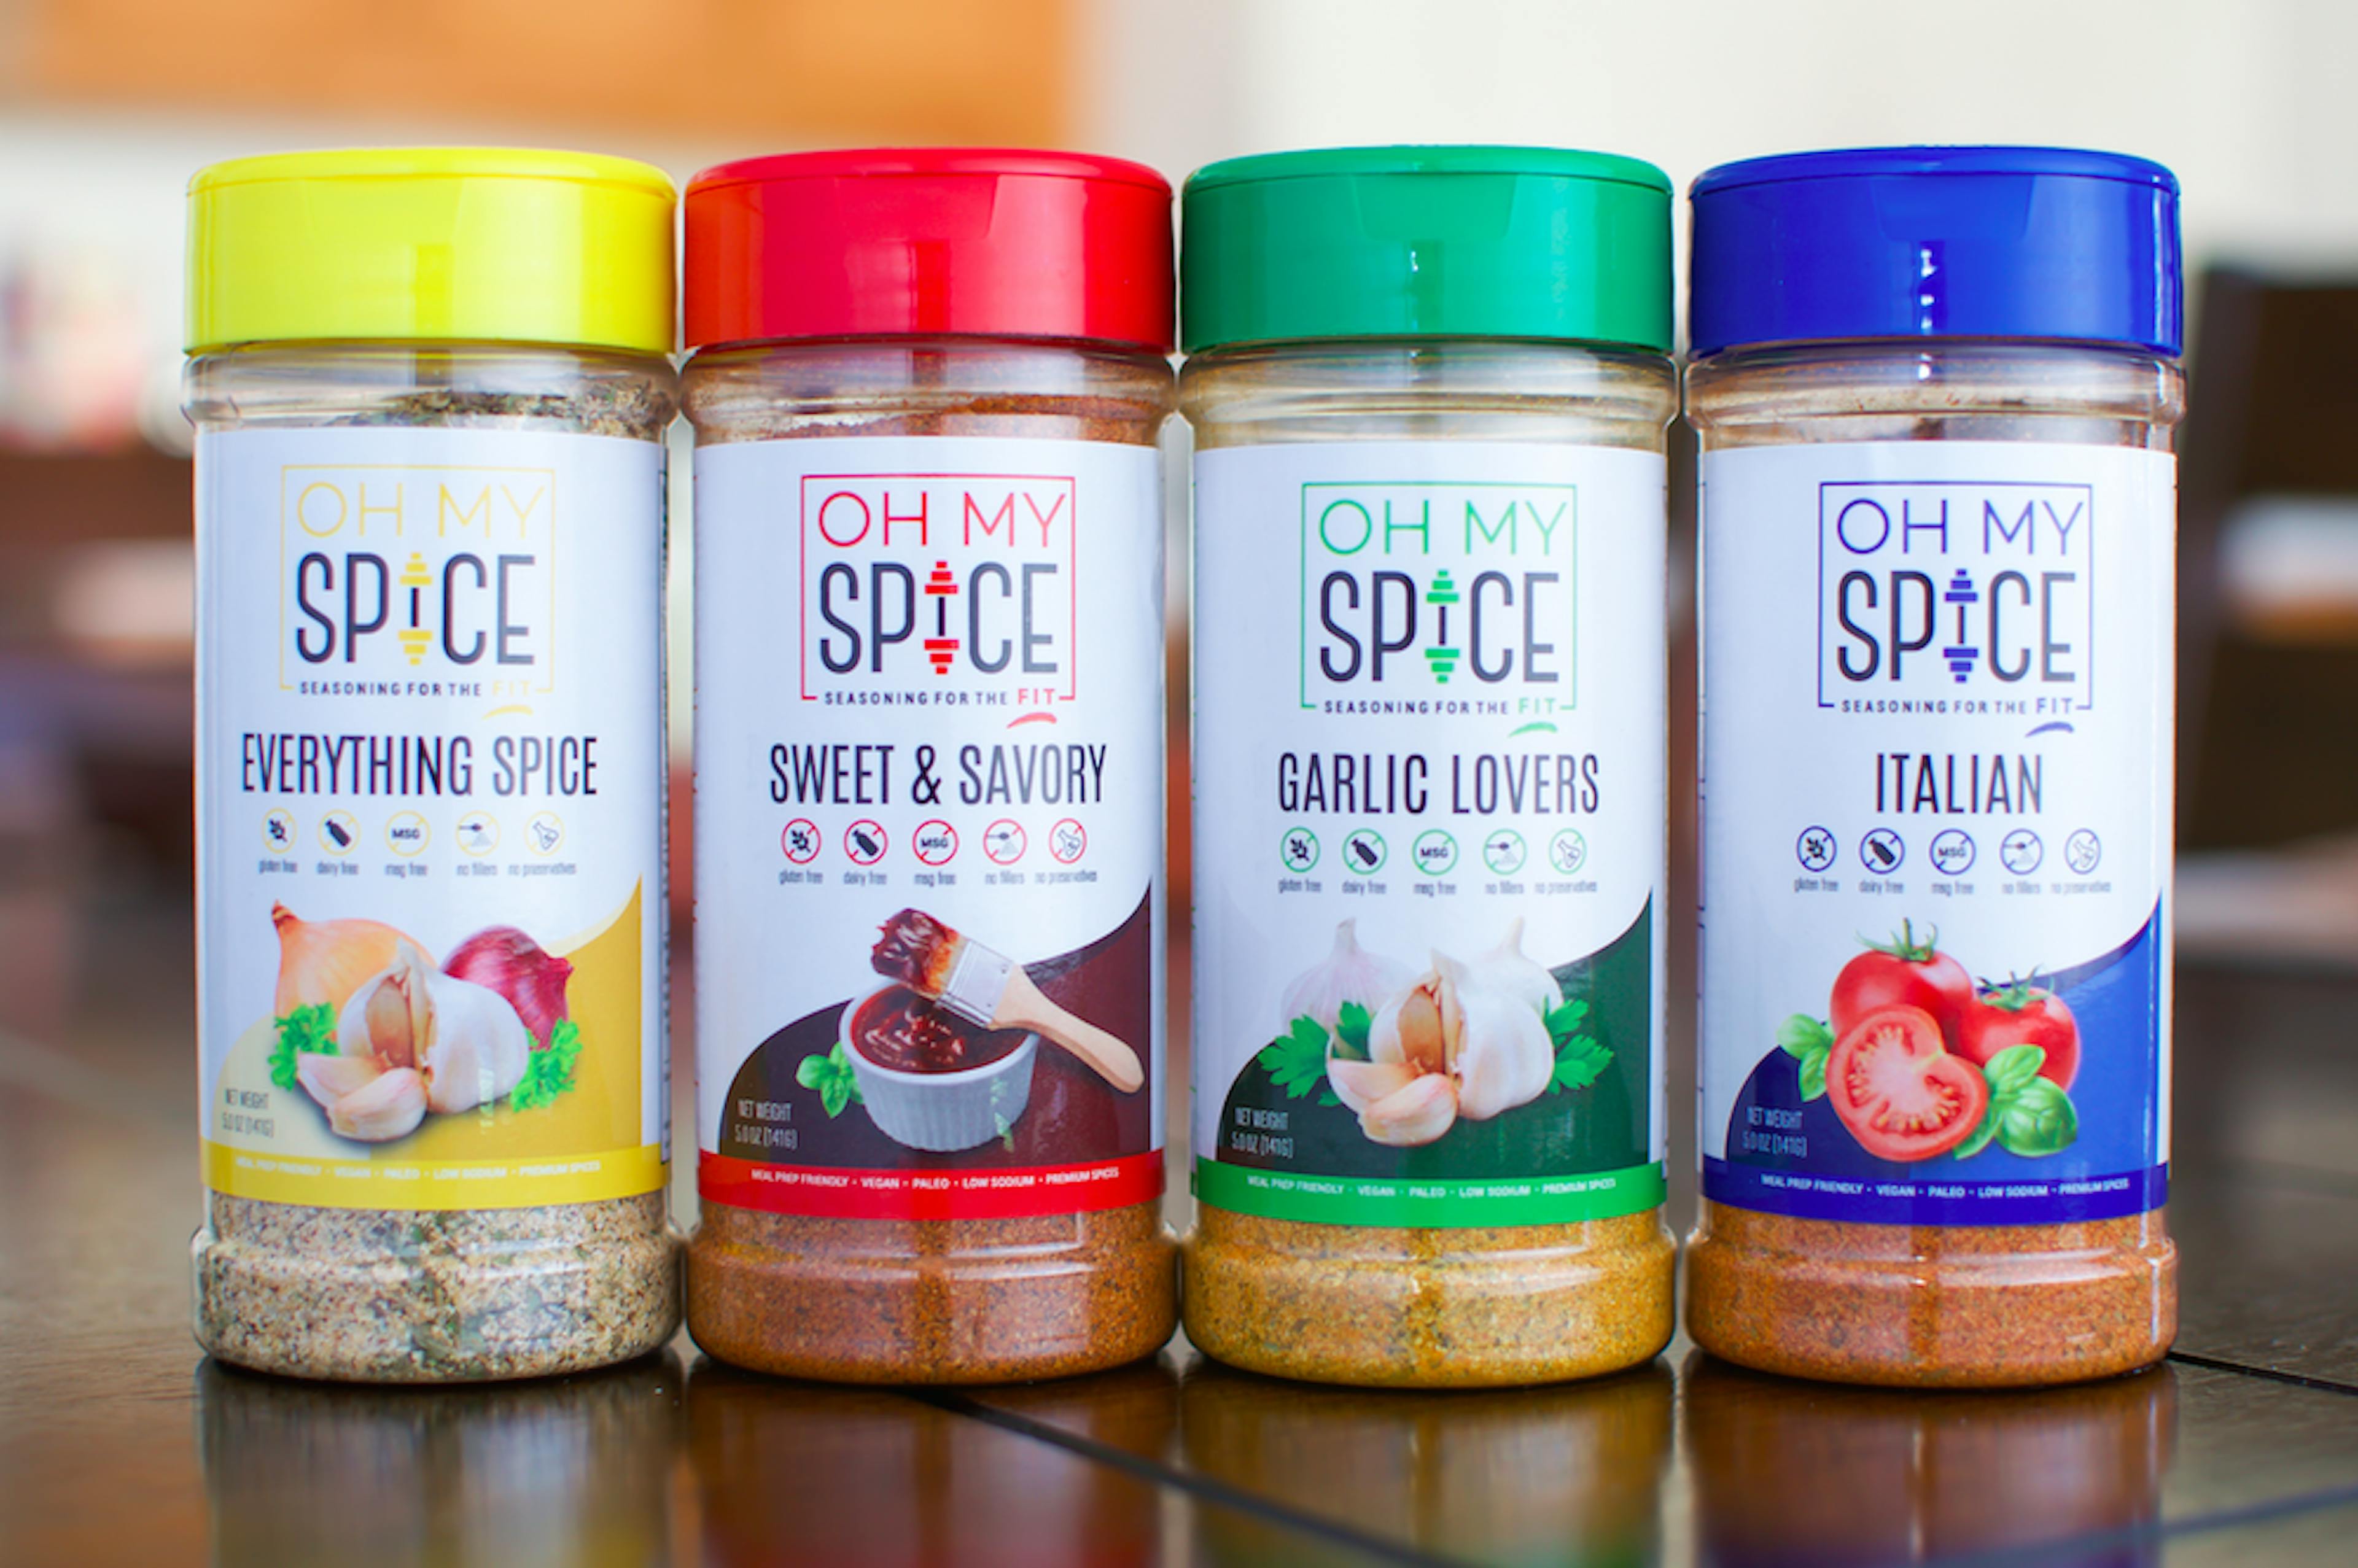 Oh My Spice flavors